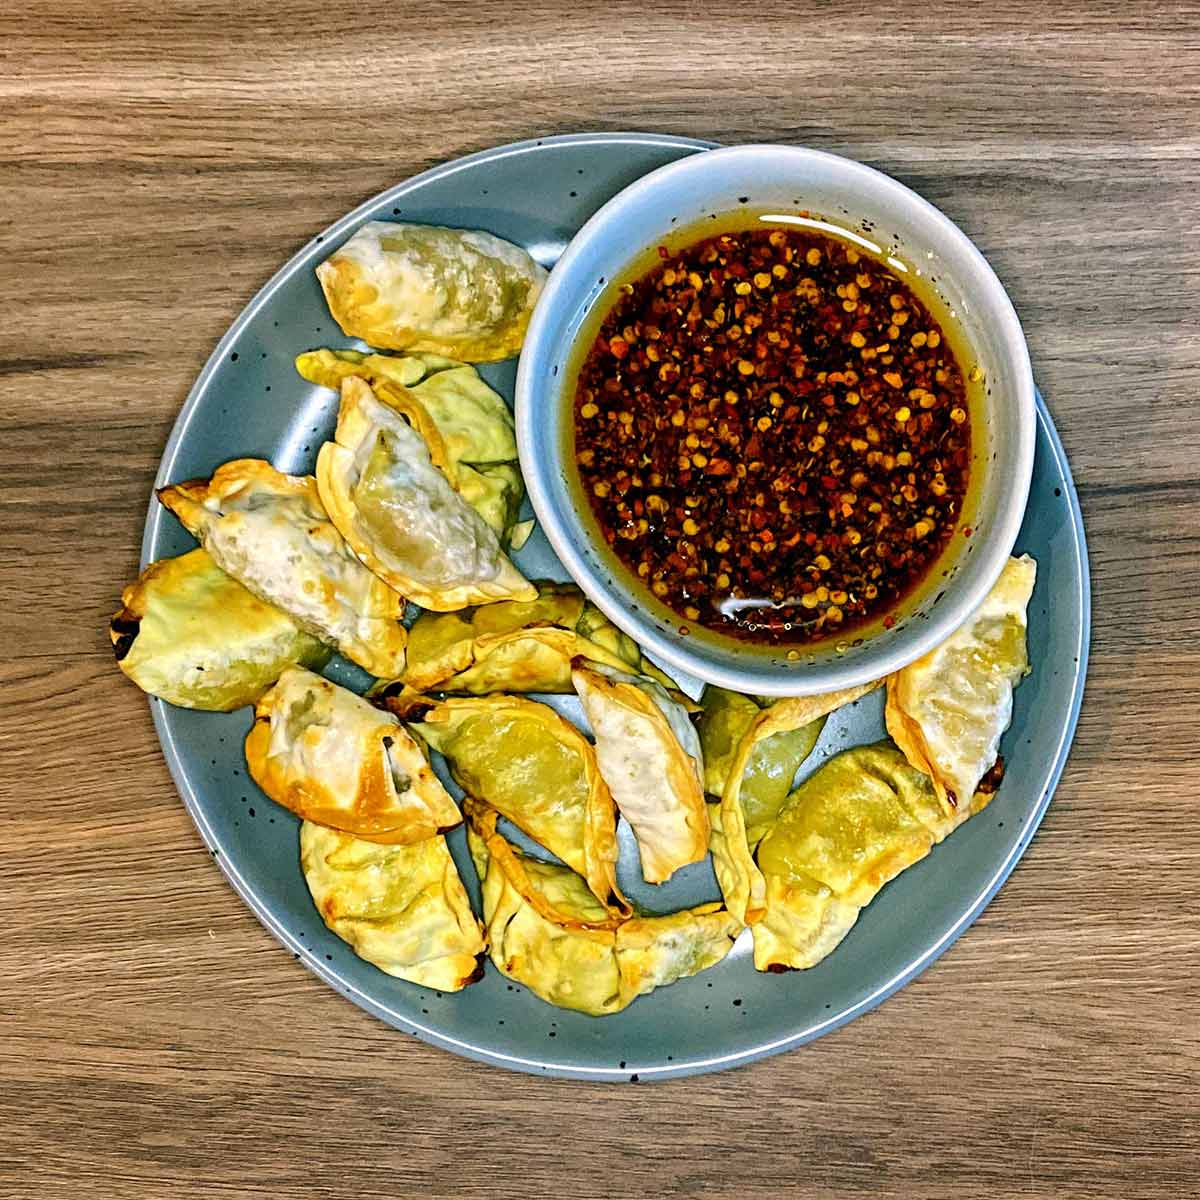 Cooked gyoza on a plate with a bowl of sauce.